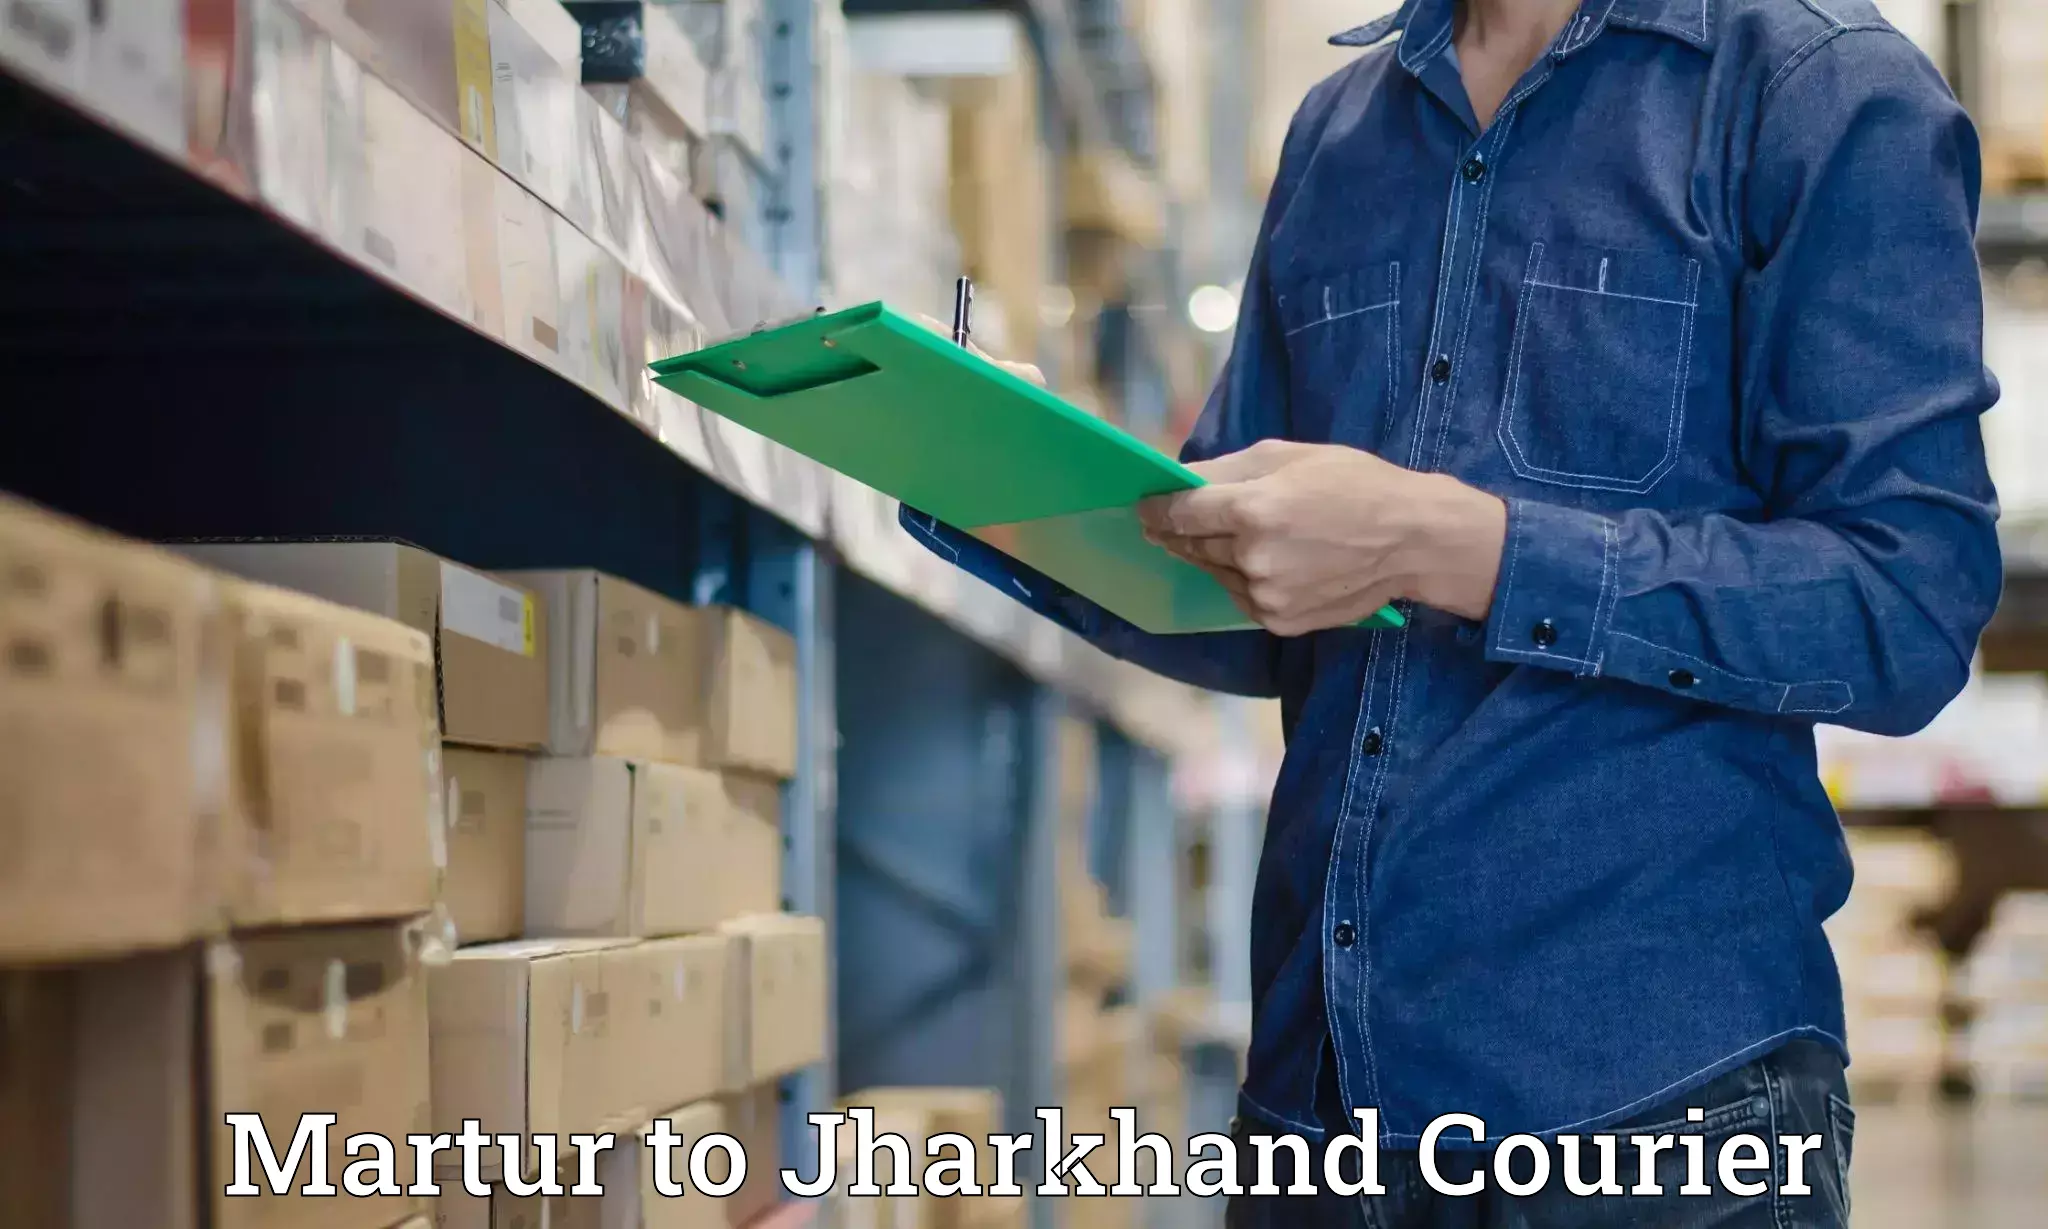 Smart shipping technology Martur to Jharkhand